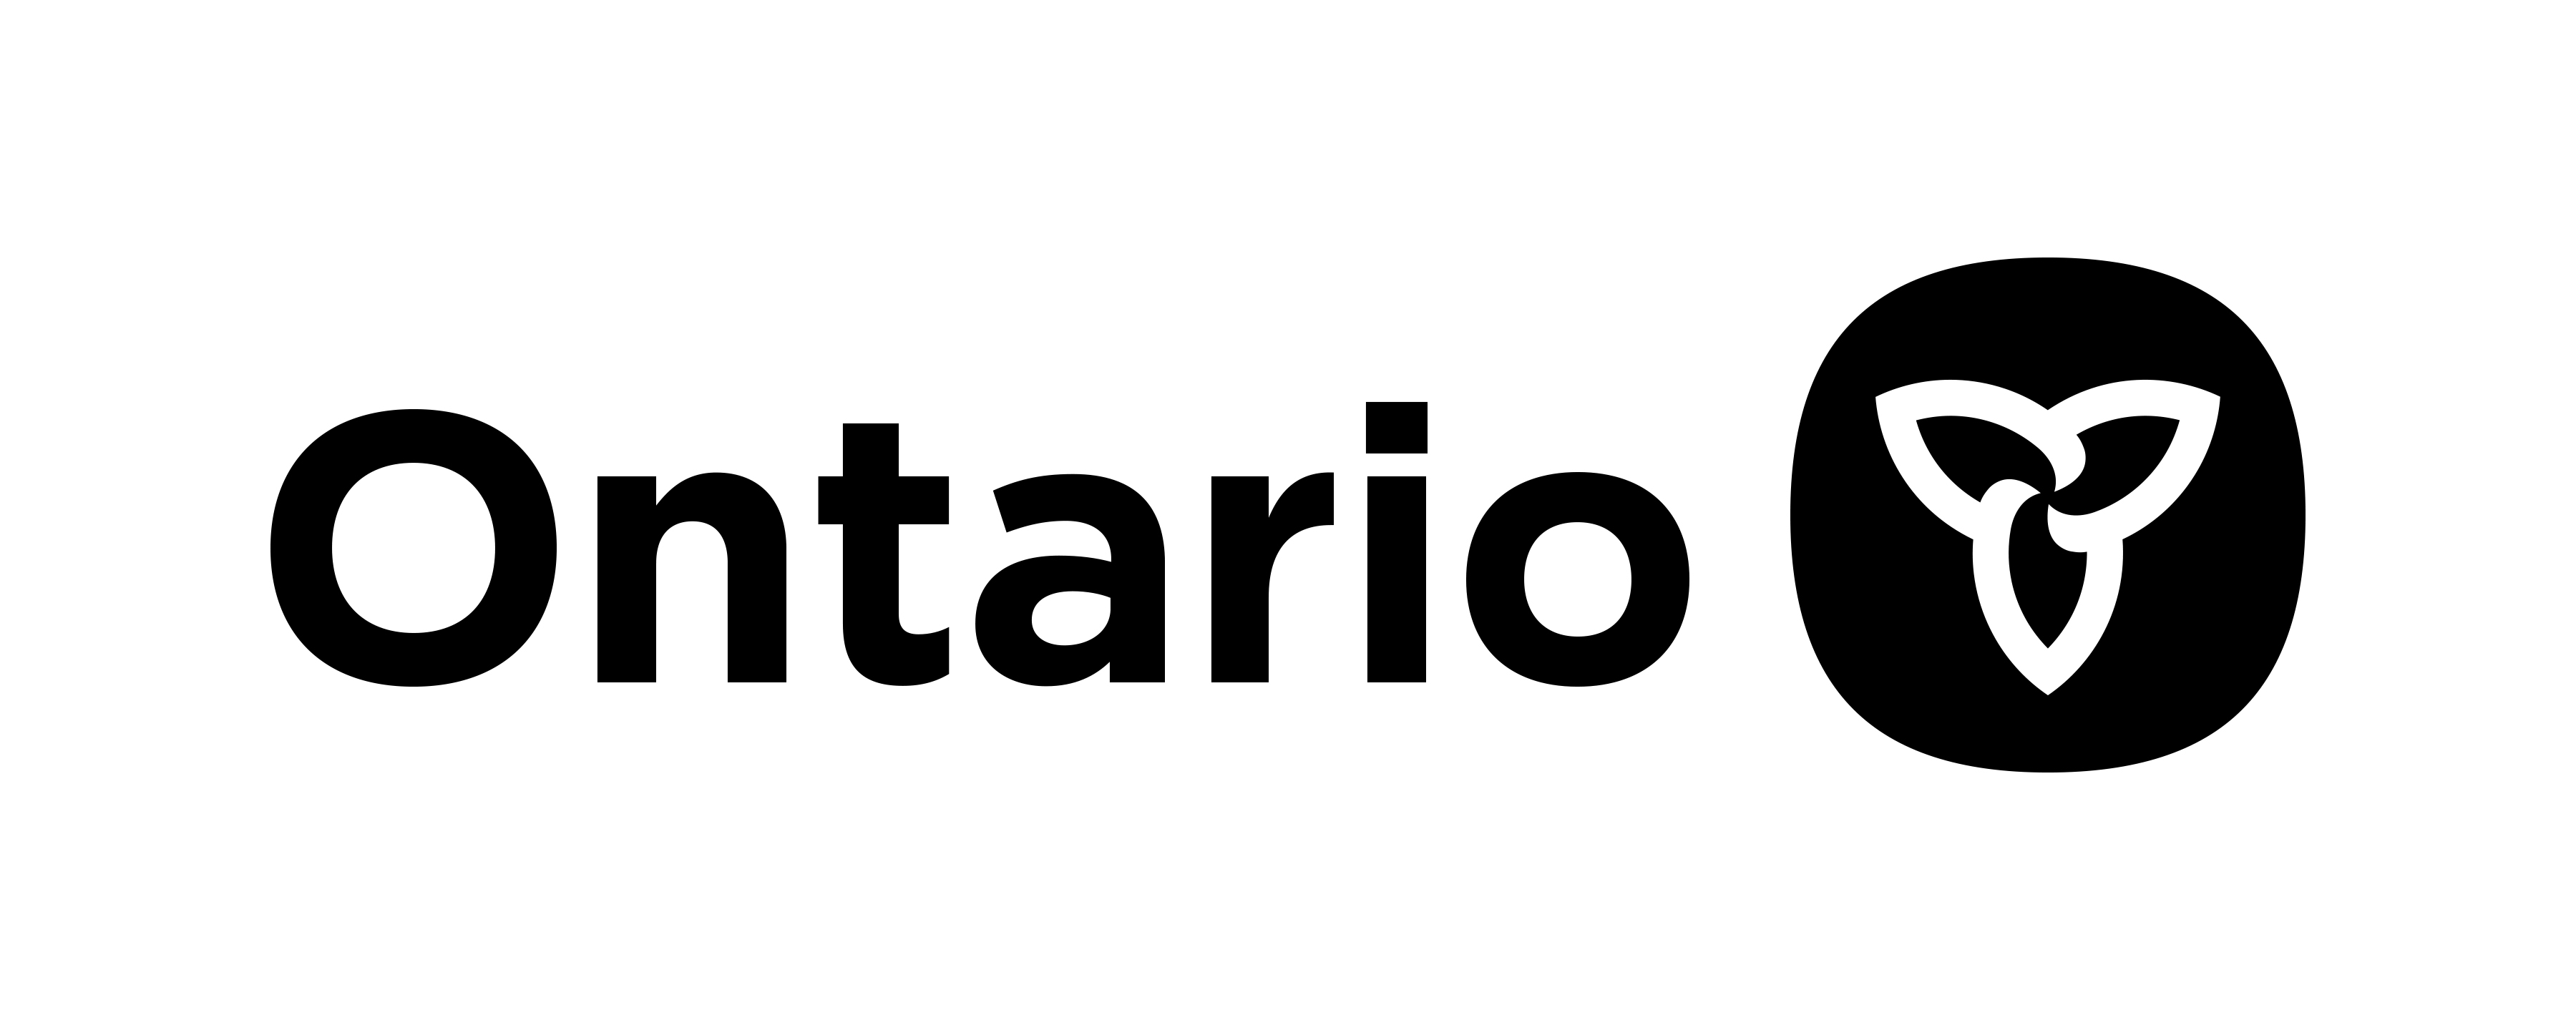 Government of Ontario